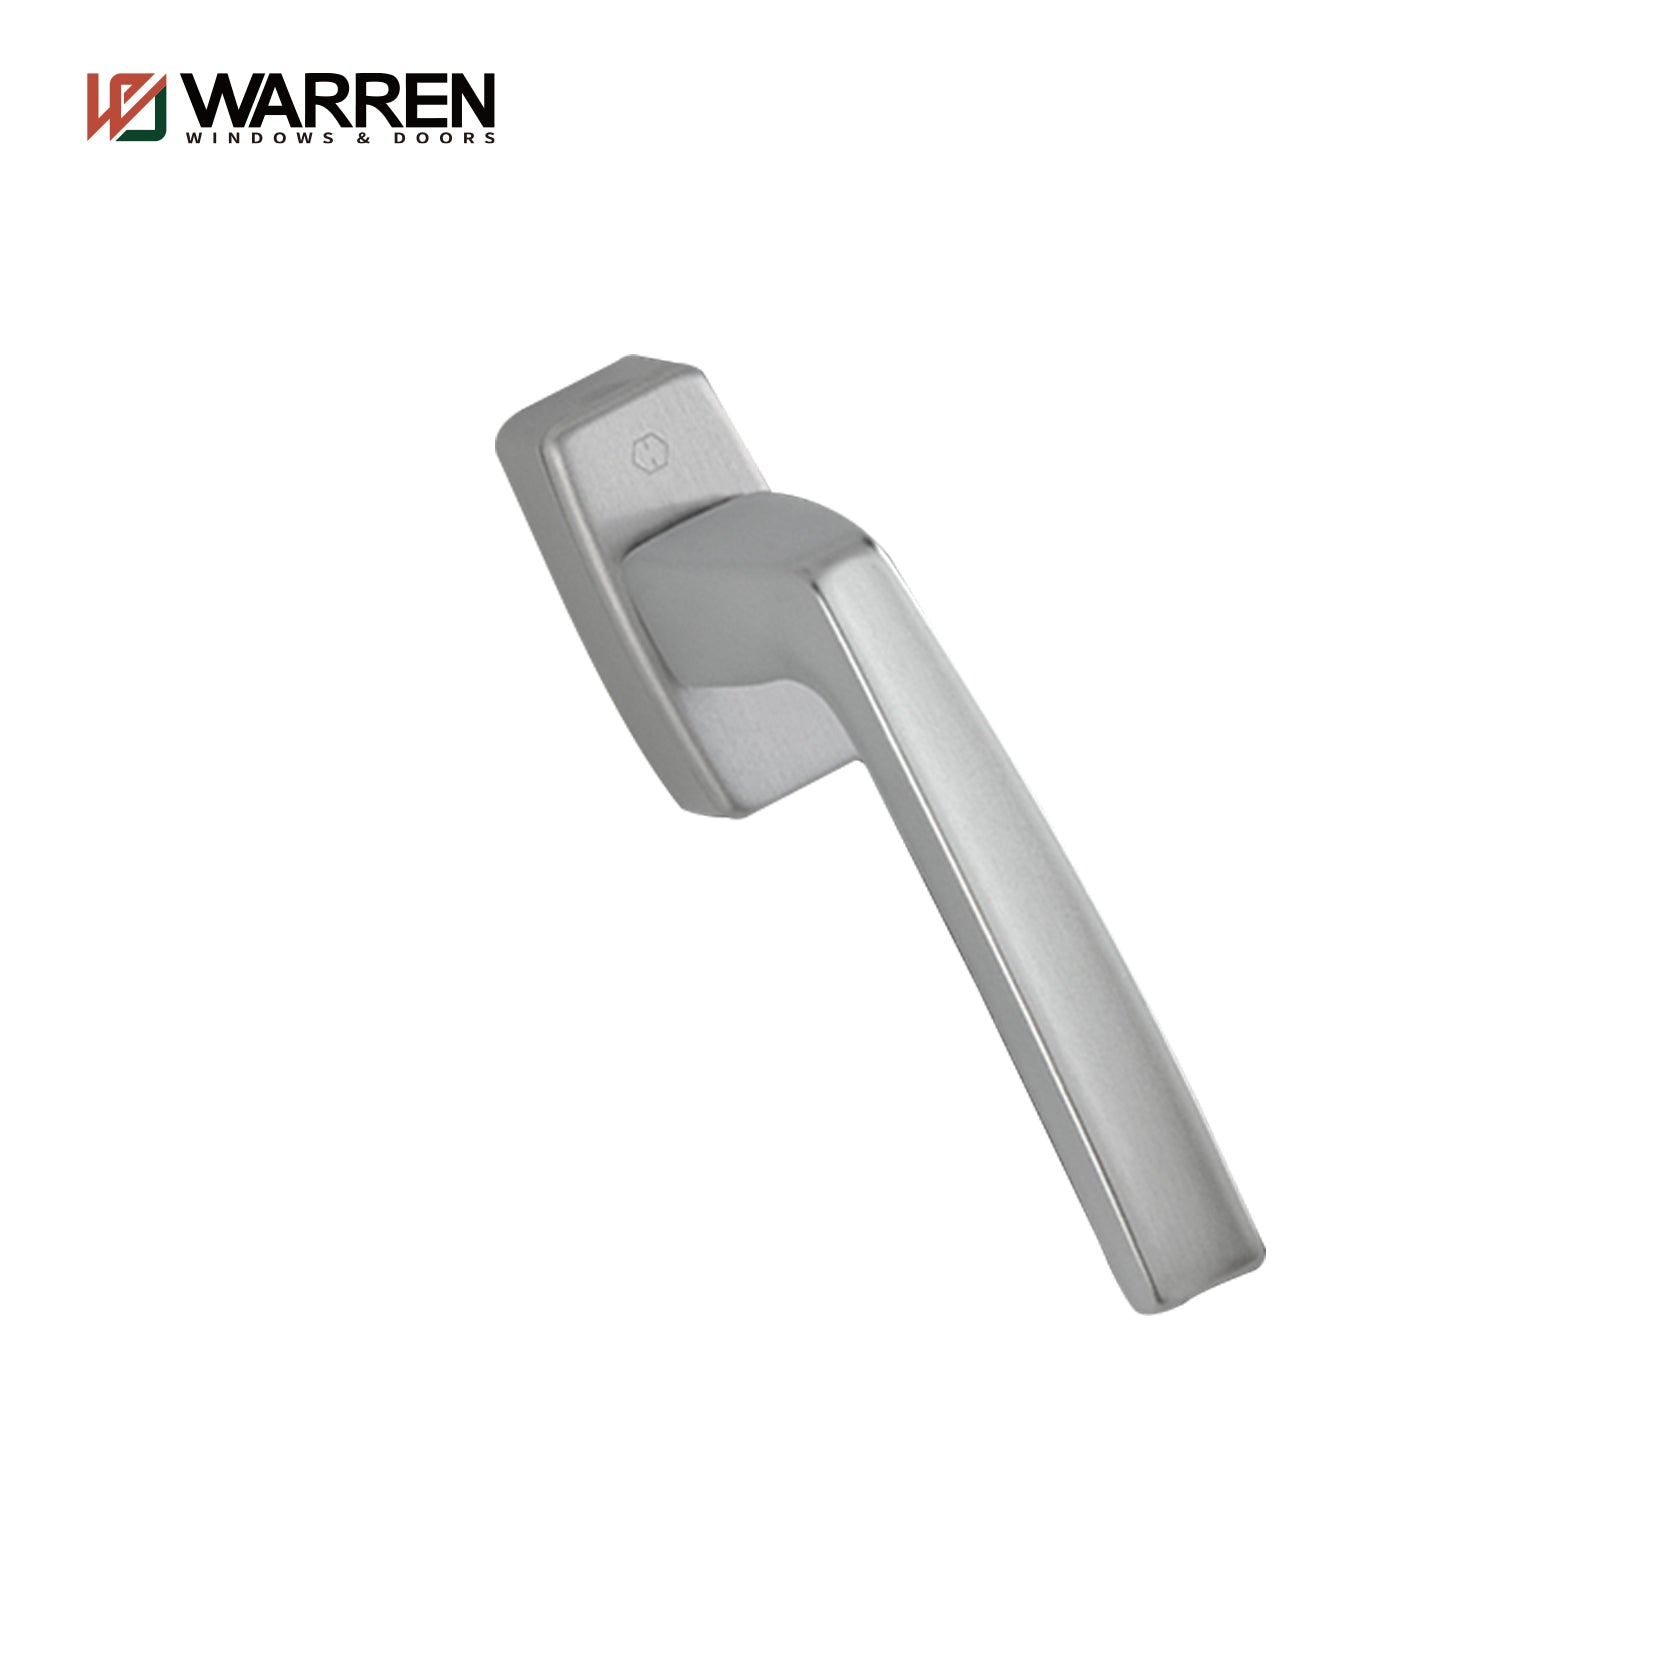 Warren fashion 30* 67 sliding window with aluminium frame and clear tempered for sale